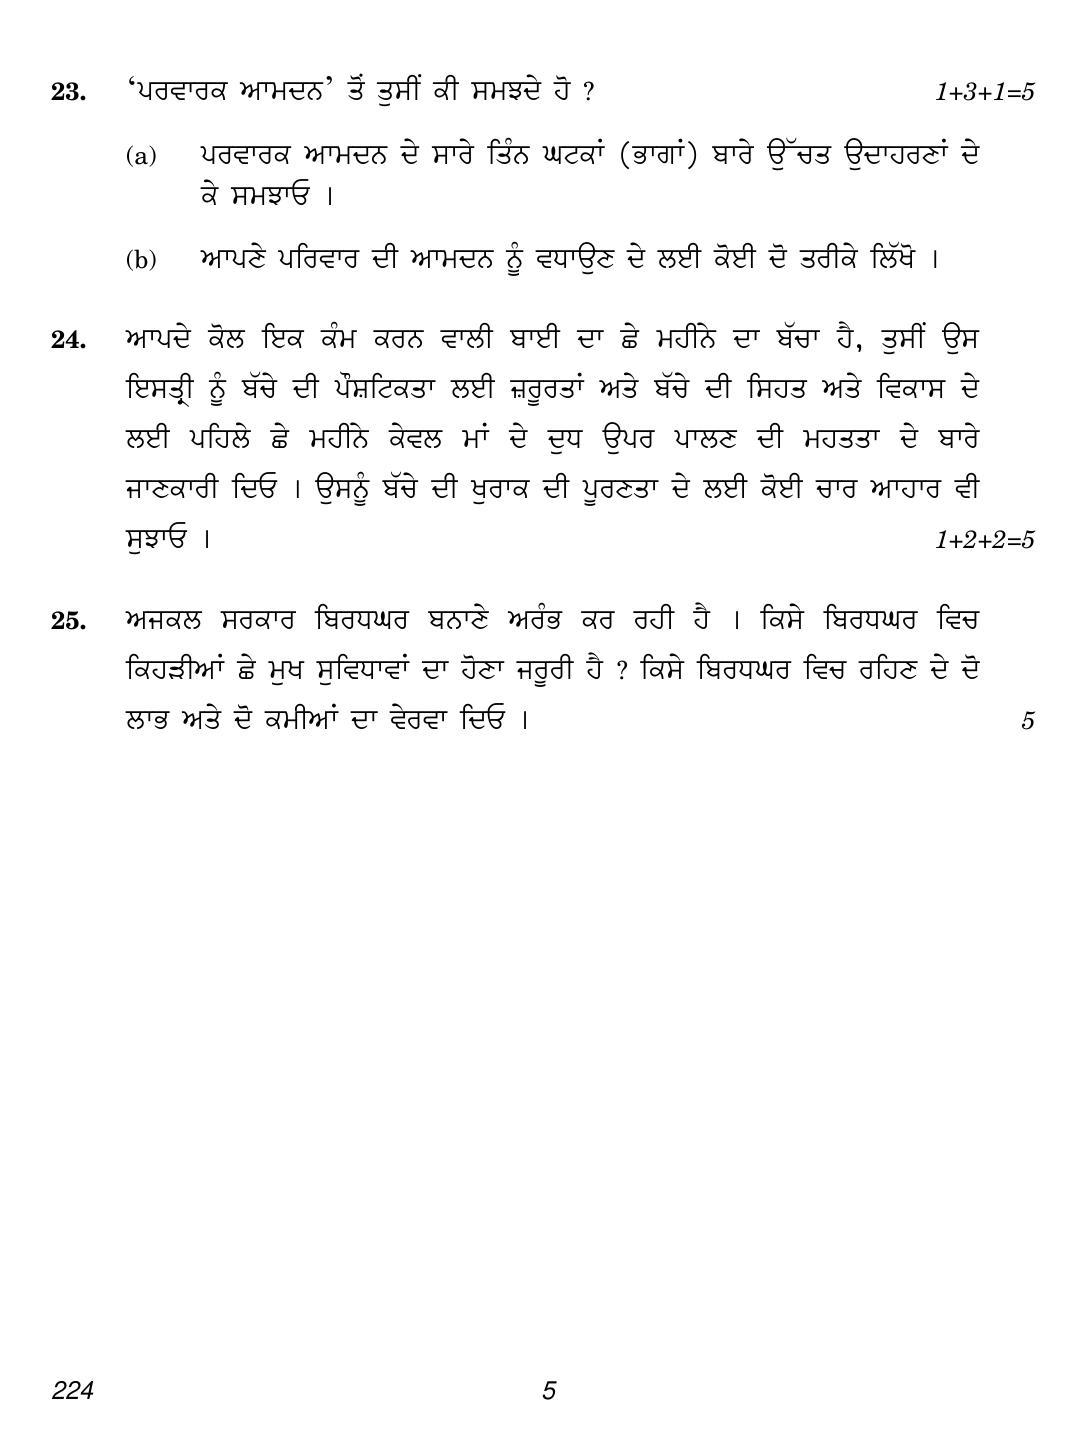 CBSE Class 12 224 (Home Science Punjabi) 2018 Question Paper - Page 5